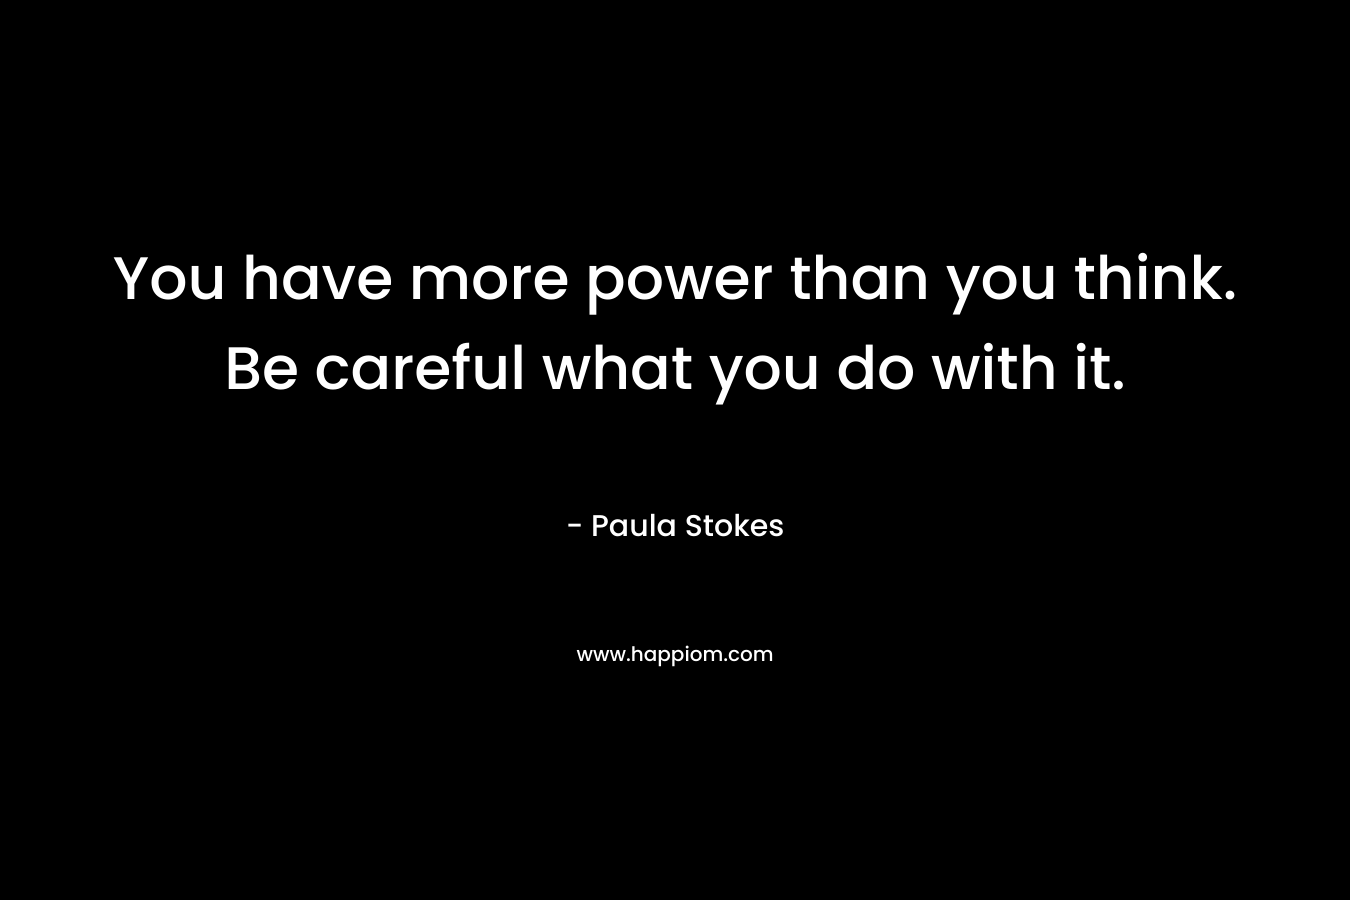 You have more power than you think. Be careful what you do with it. – Paula Stokes